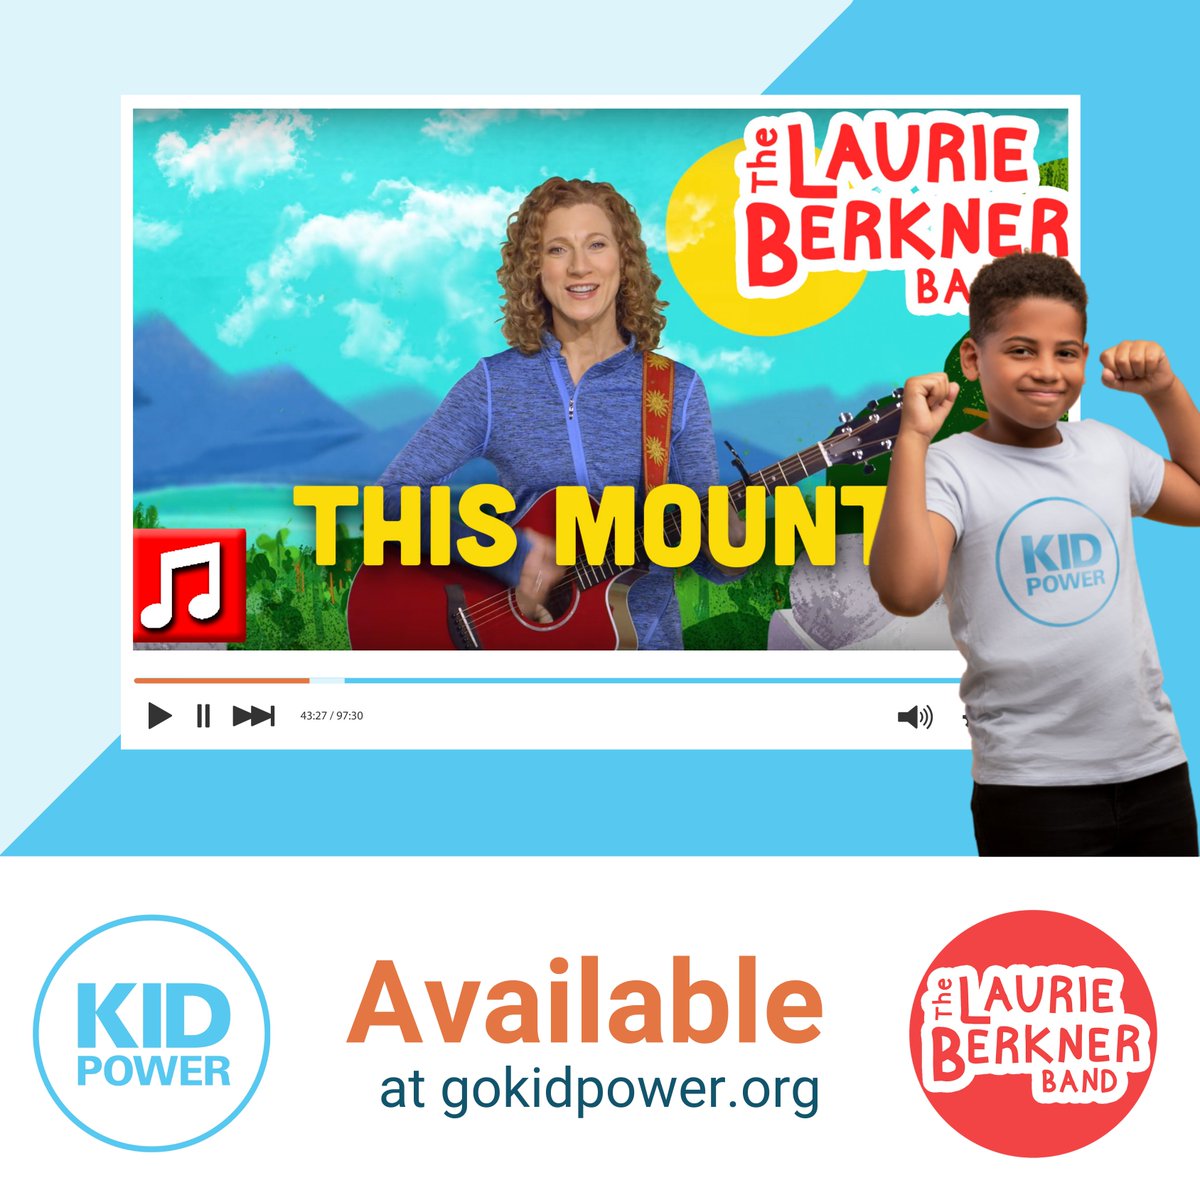 @LaurieBerkner will have your kiddos dancing their little hearts out! Believe it when we tell you that there is no better way to get them up and moving while saving lives along the way! So, join in on the fun! Link in bio. Link: gokidpower.org